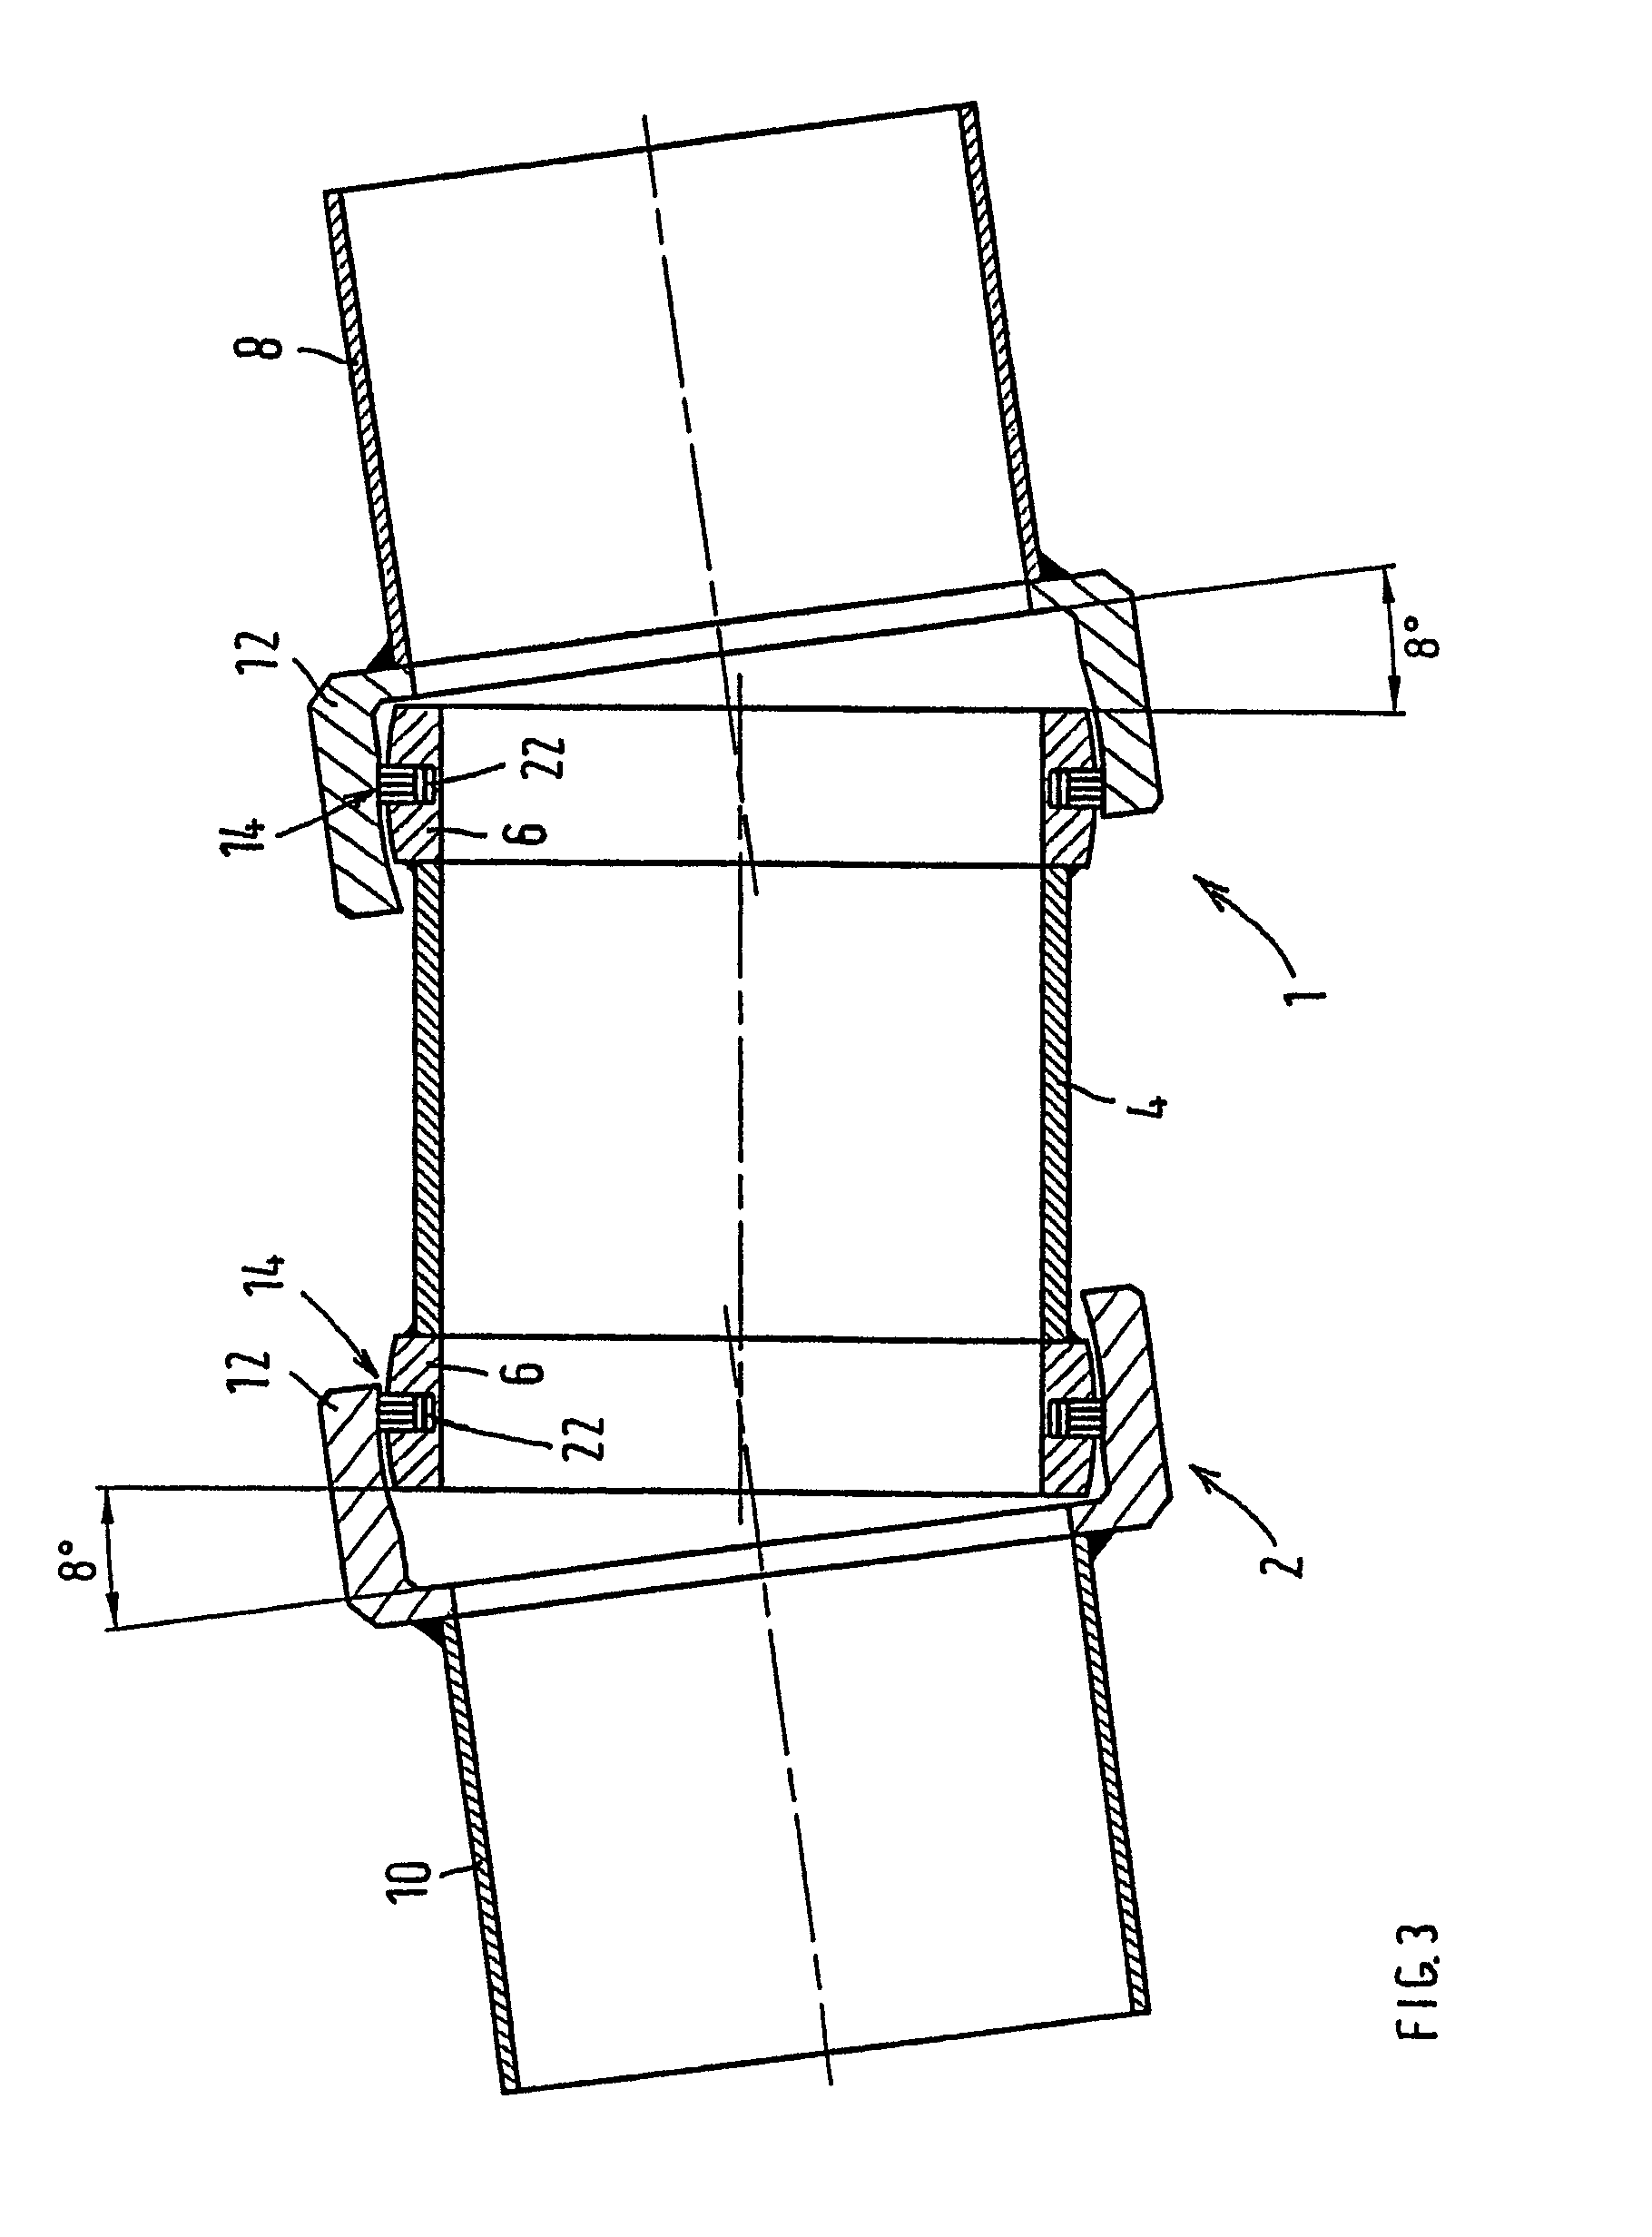 Axial and radial play and angle compensation of a tolerating pipe connection